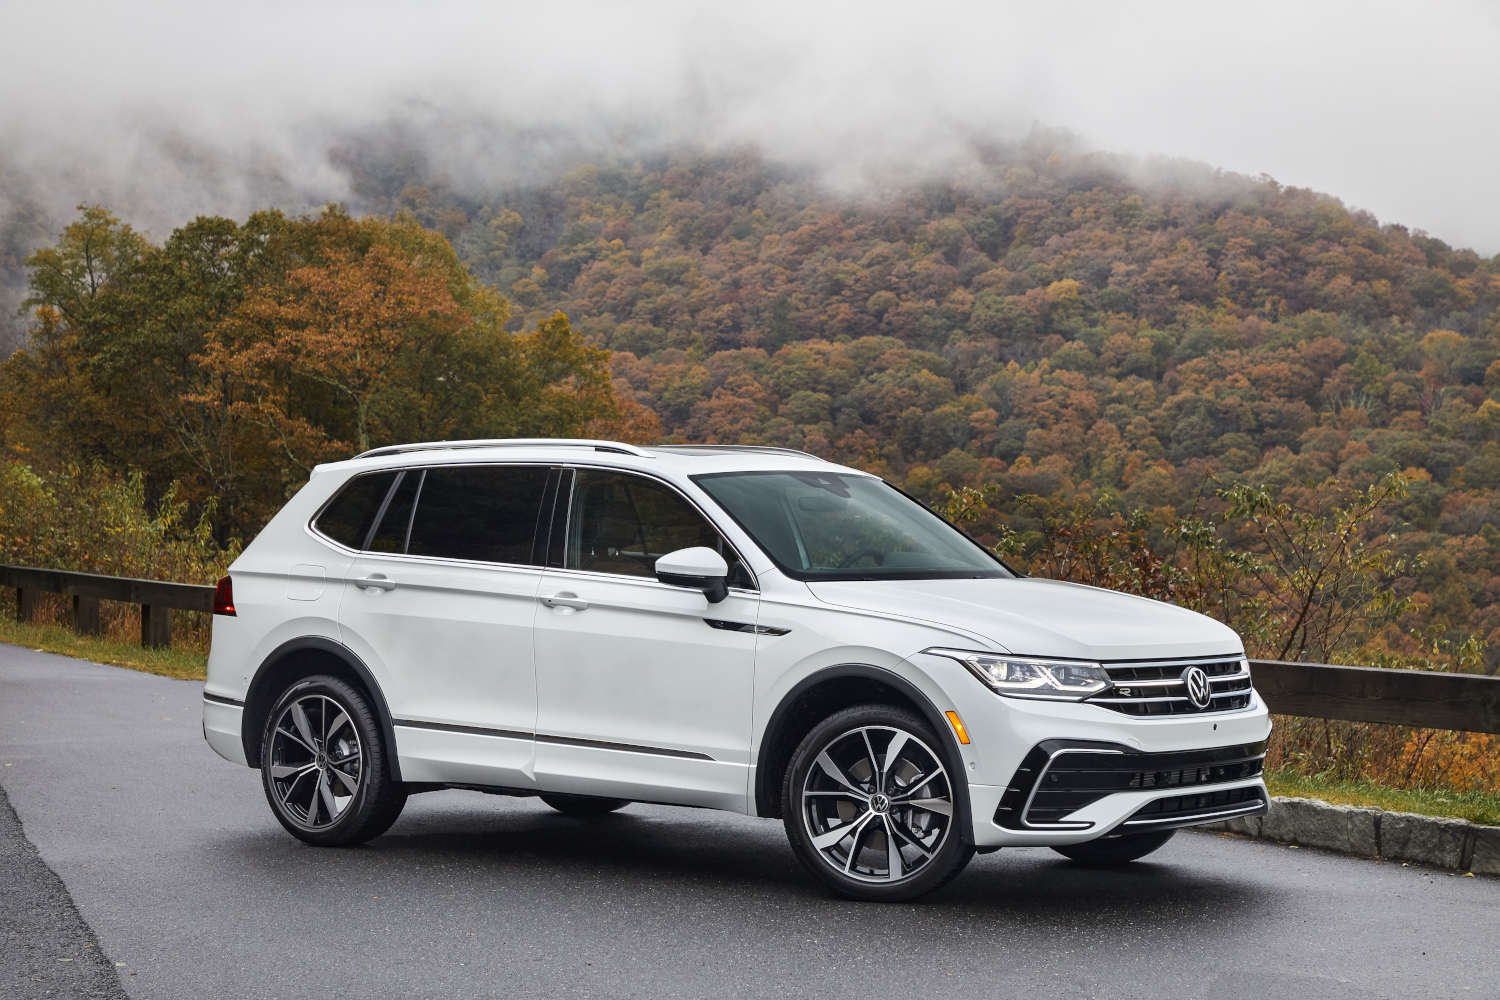 This Volkswagen Tiguan is a good small SUV